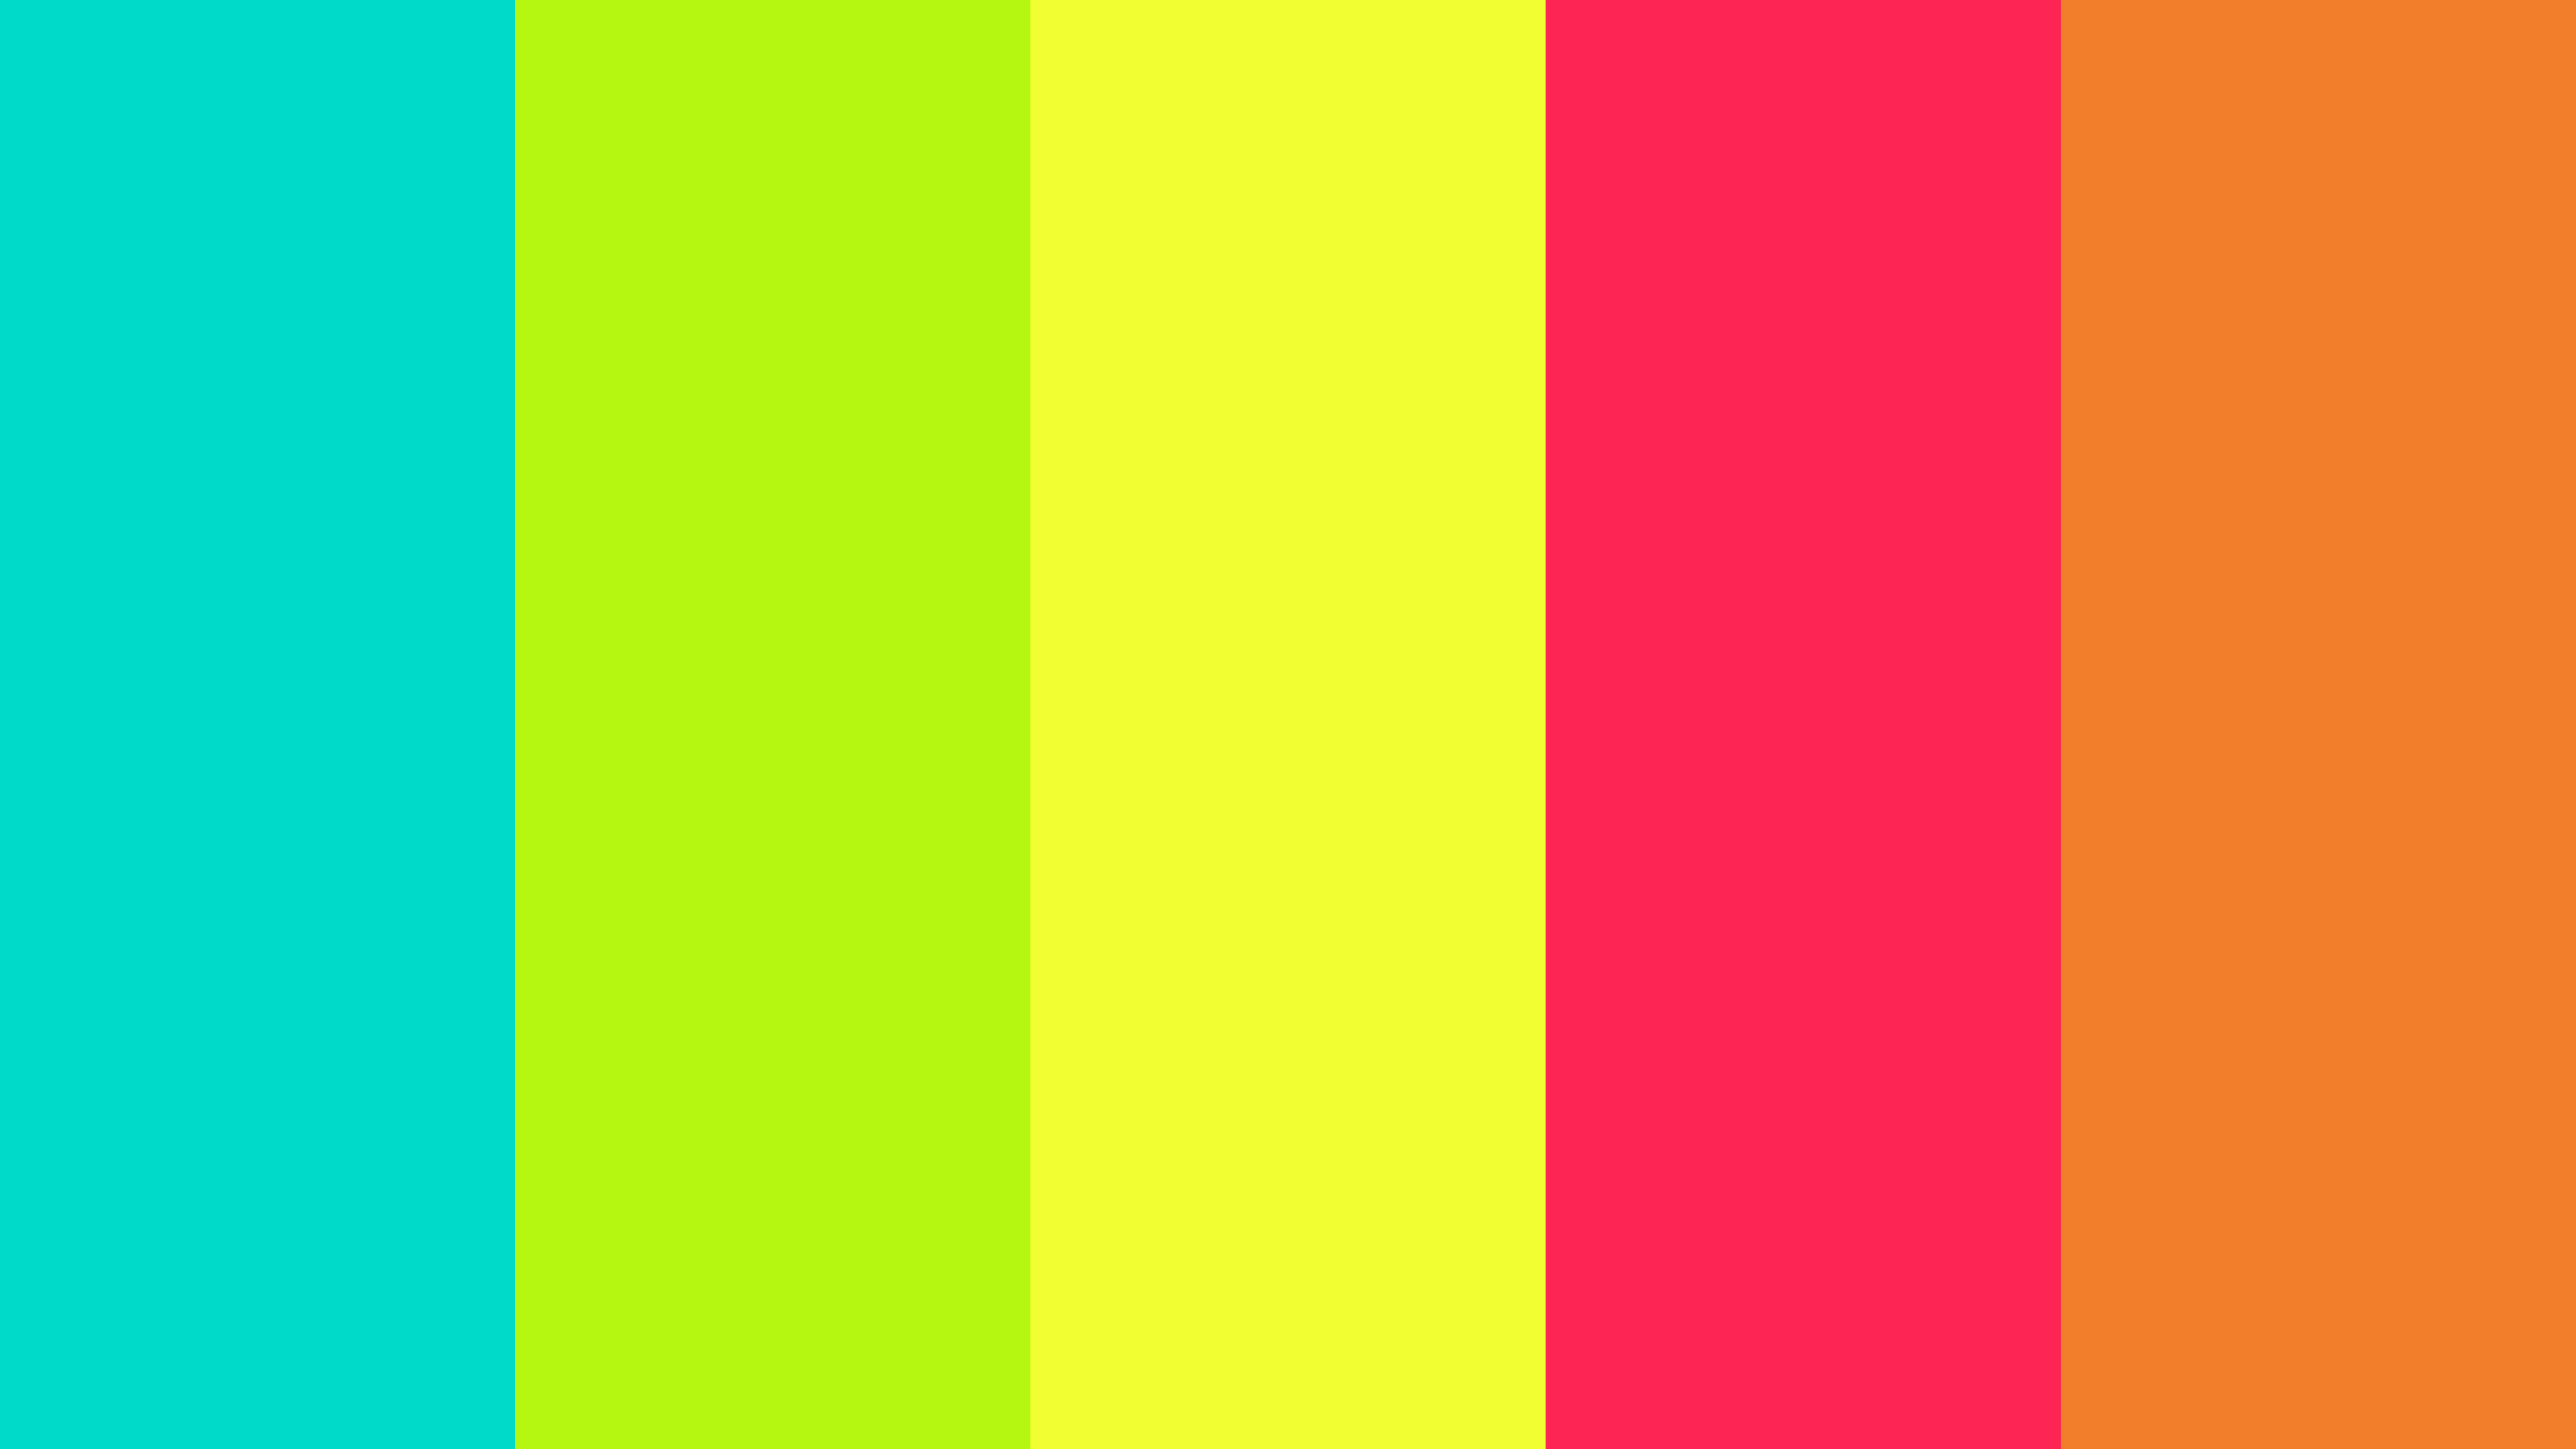 Download Robin's Egg Blue - Lime - Golden Fizz - Radical Red - Tango Color scheme | iColorpalette